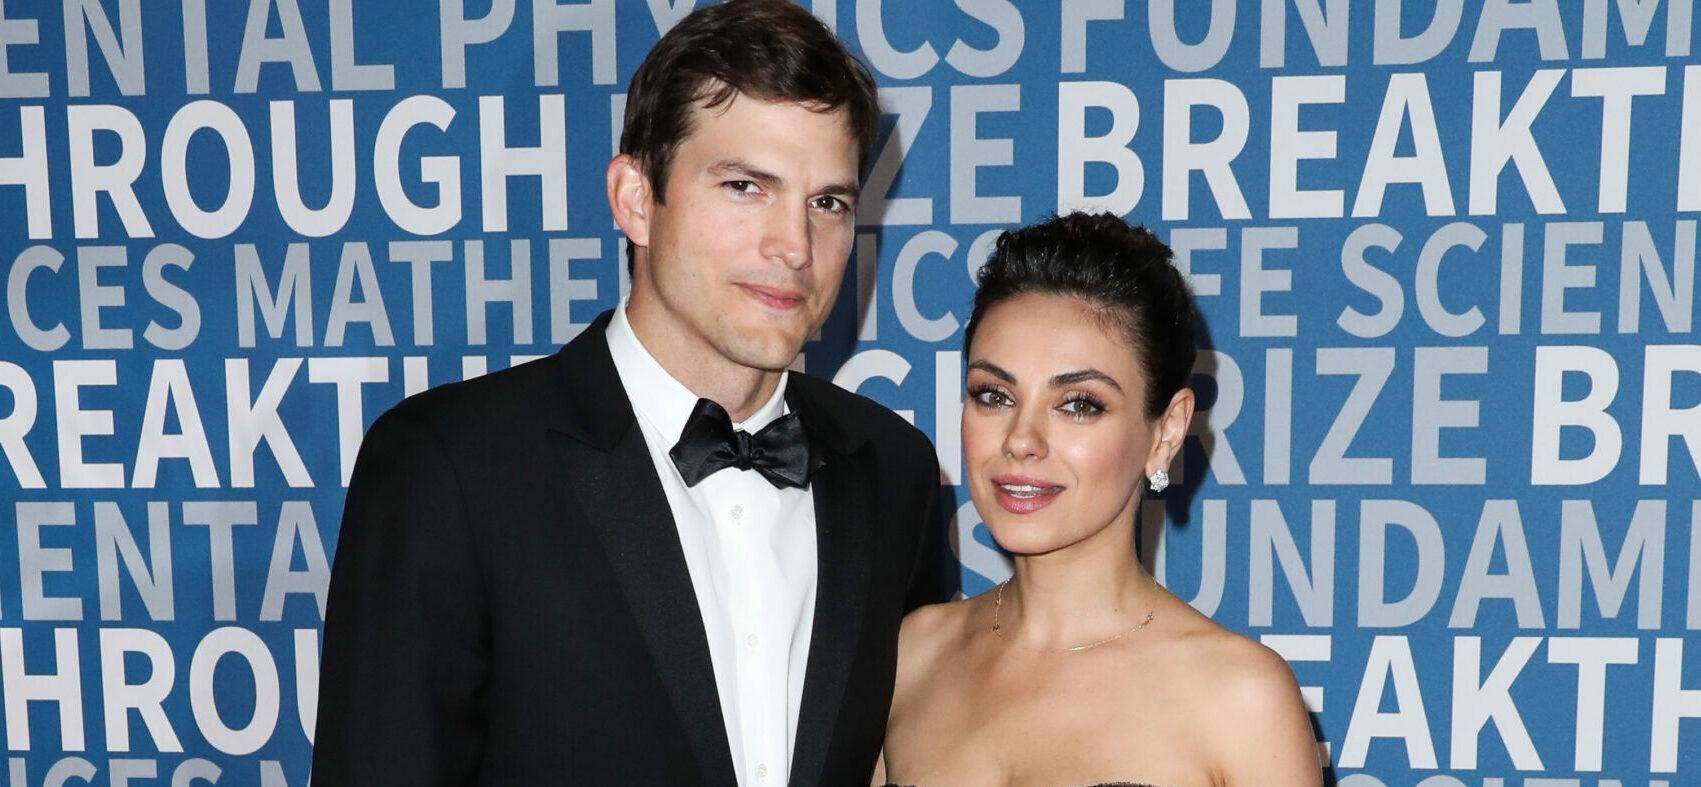 Ashton Kutcher & Mila Kunis, David & Victoria Beckham And Other Stars Who Got Hitched On The 4th Of July